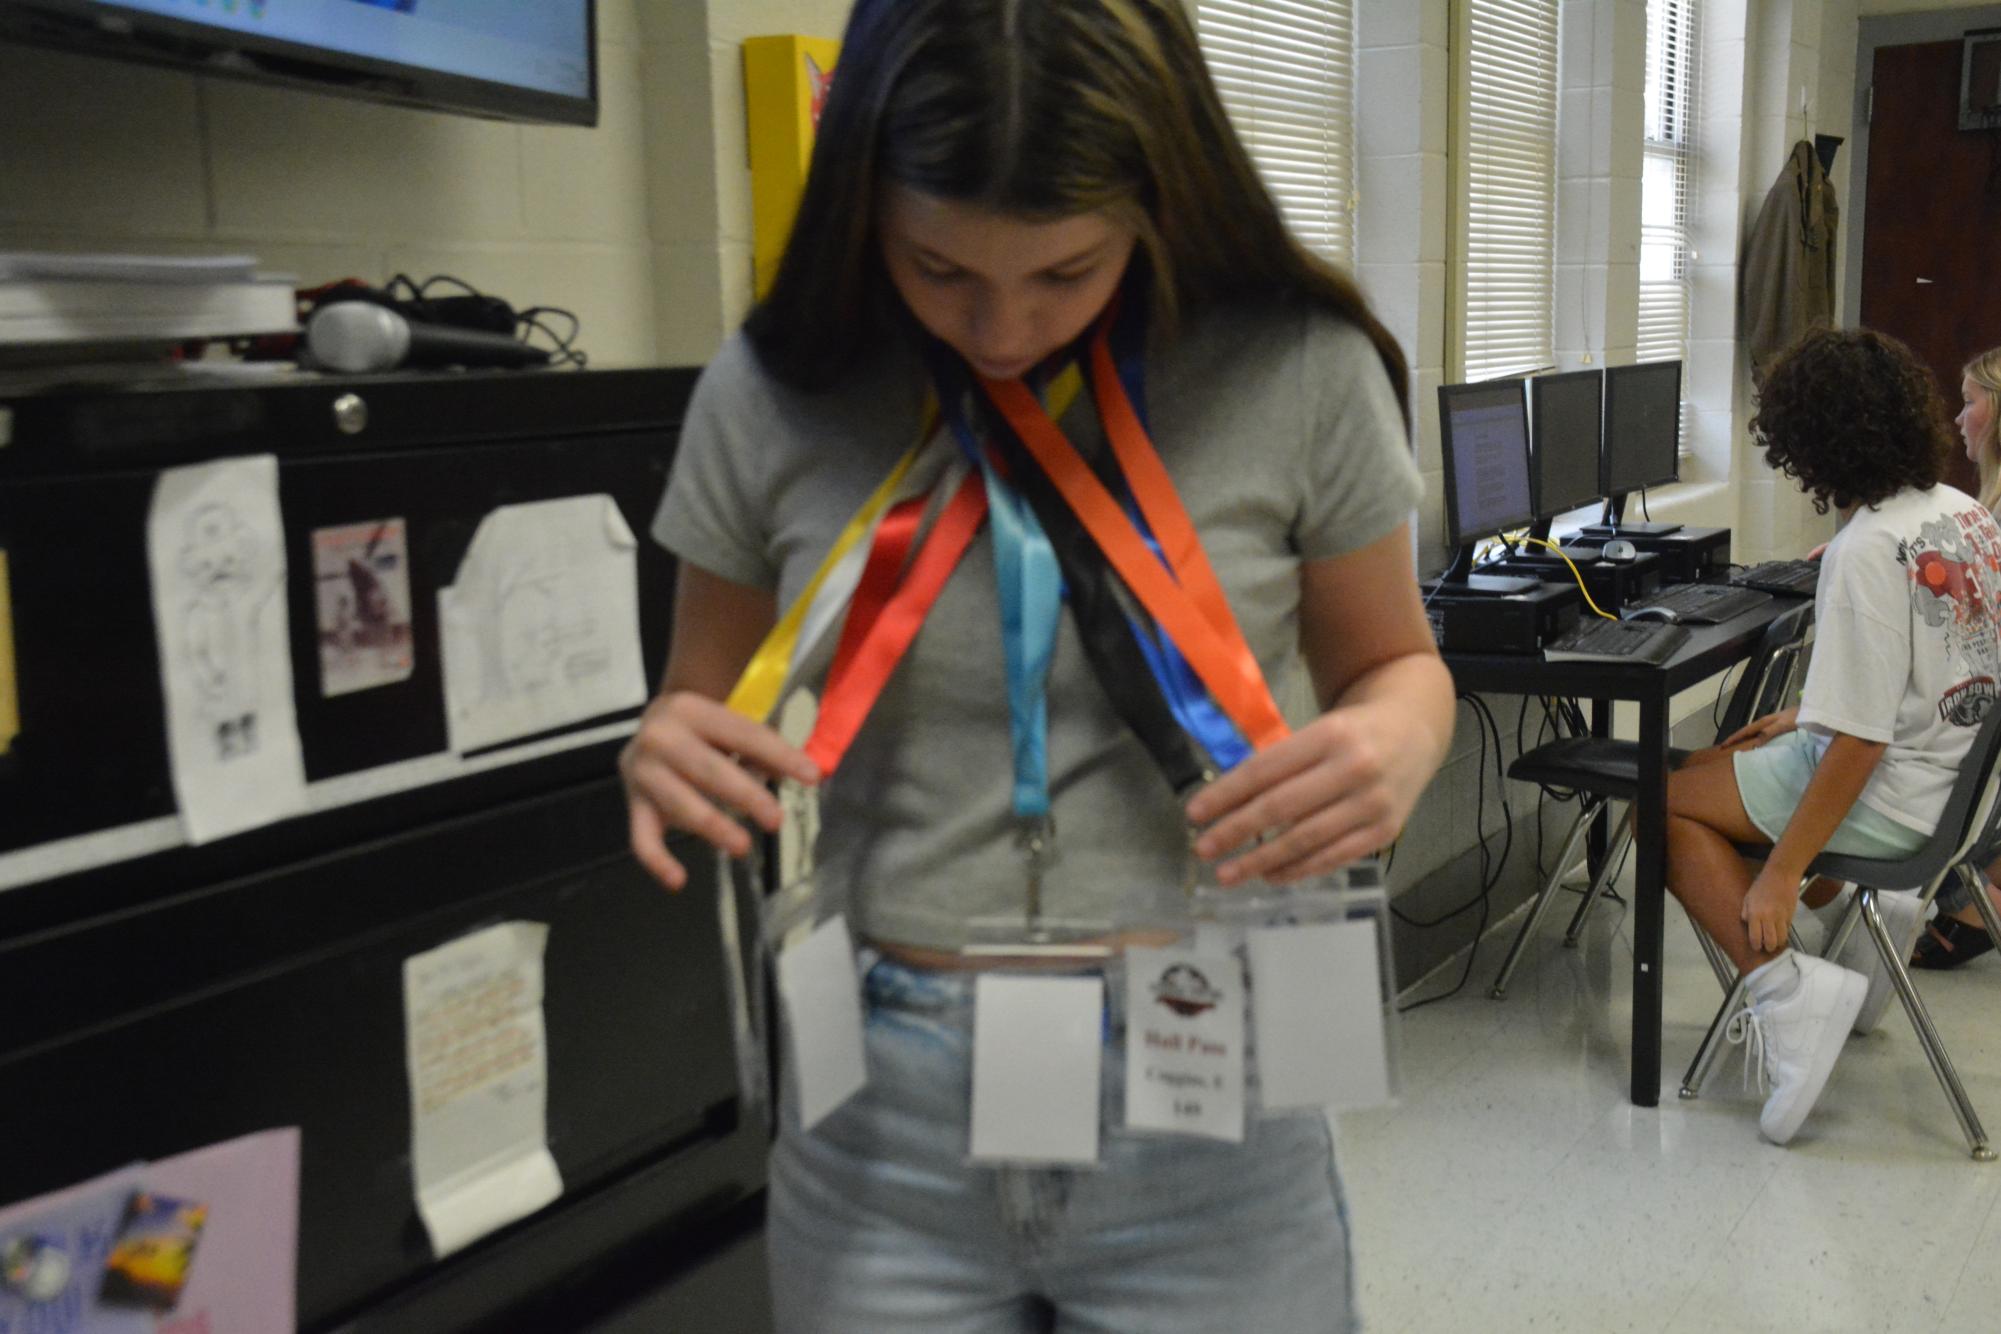 Sophomore Hannah Derreberry chooses which pass she needs to go to the guidance office. Derreberry was showing to the class how complicated the new system is until you learn what colors to to what part of the building. 